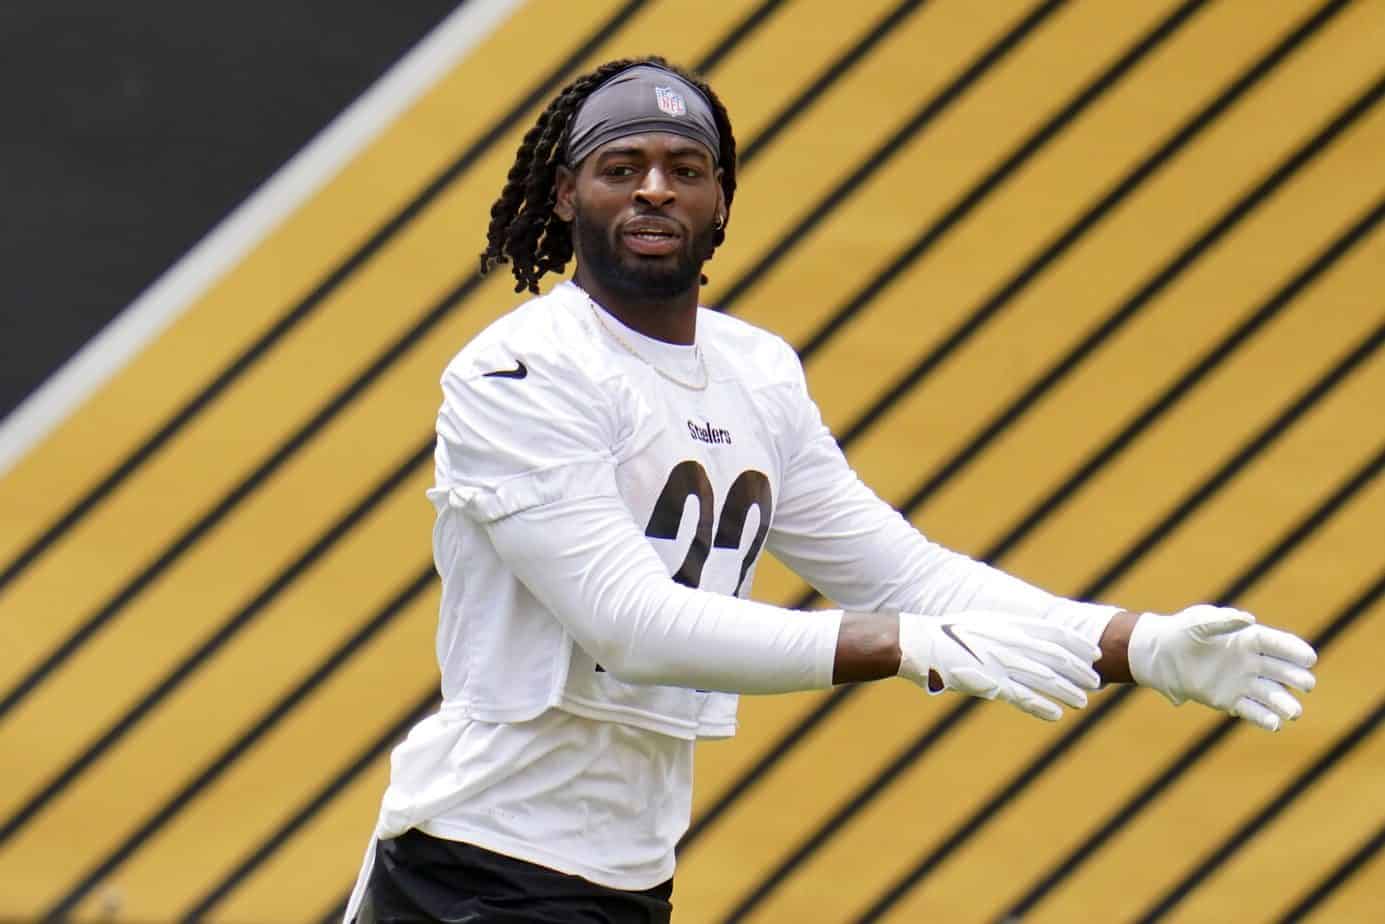 Pittsburgh Steelers running back Najee Harris was quick to delete an Instagram post that criticized quarterback Ben Roethlisberger prior to their playoff game